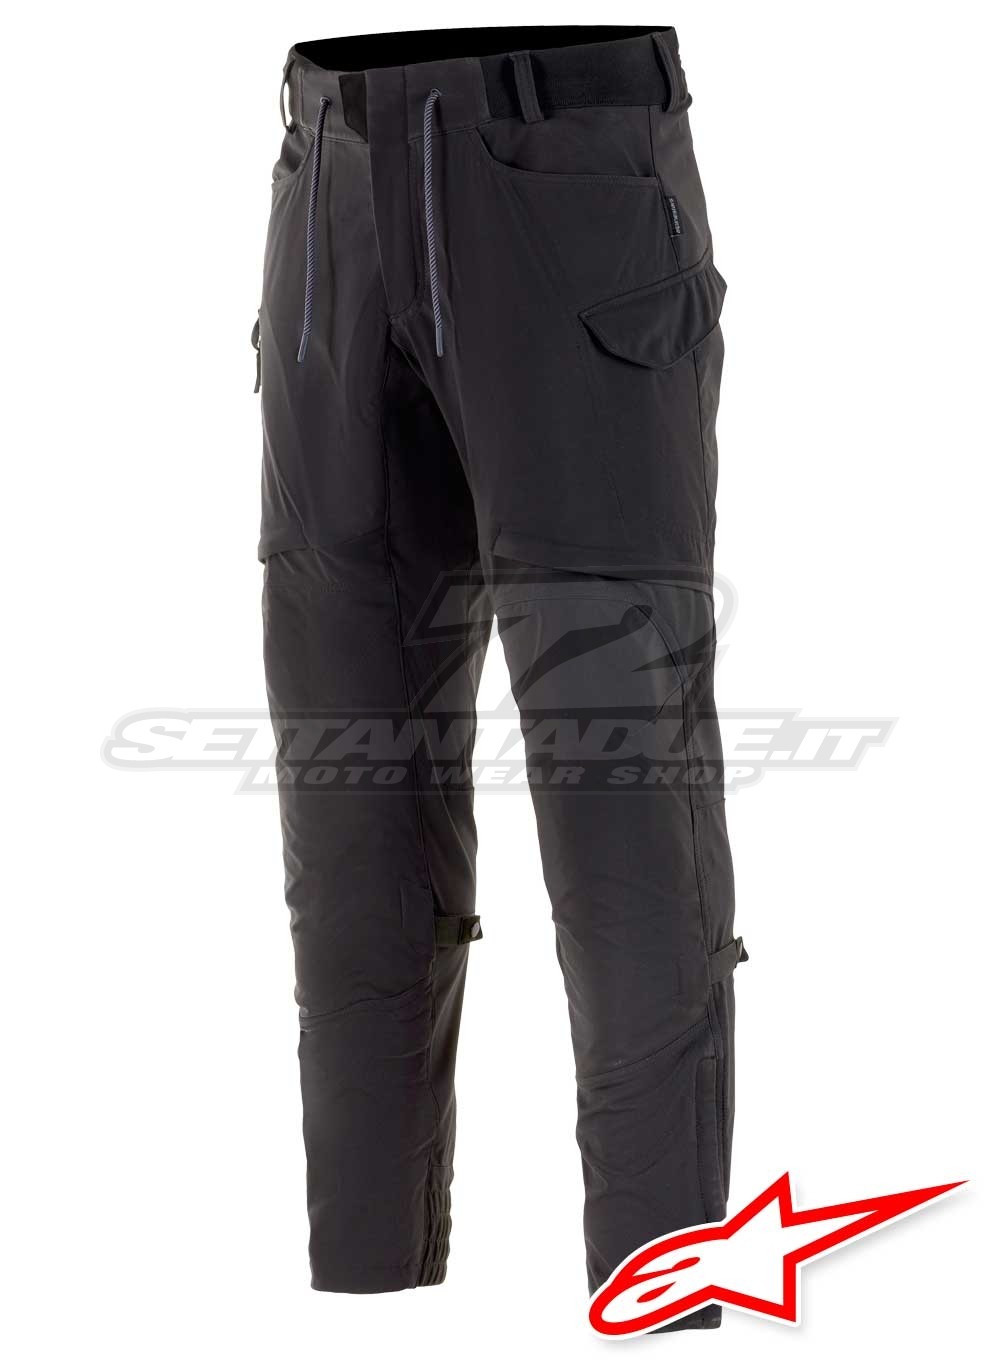 pants for riding motorcycle